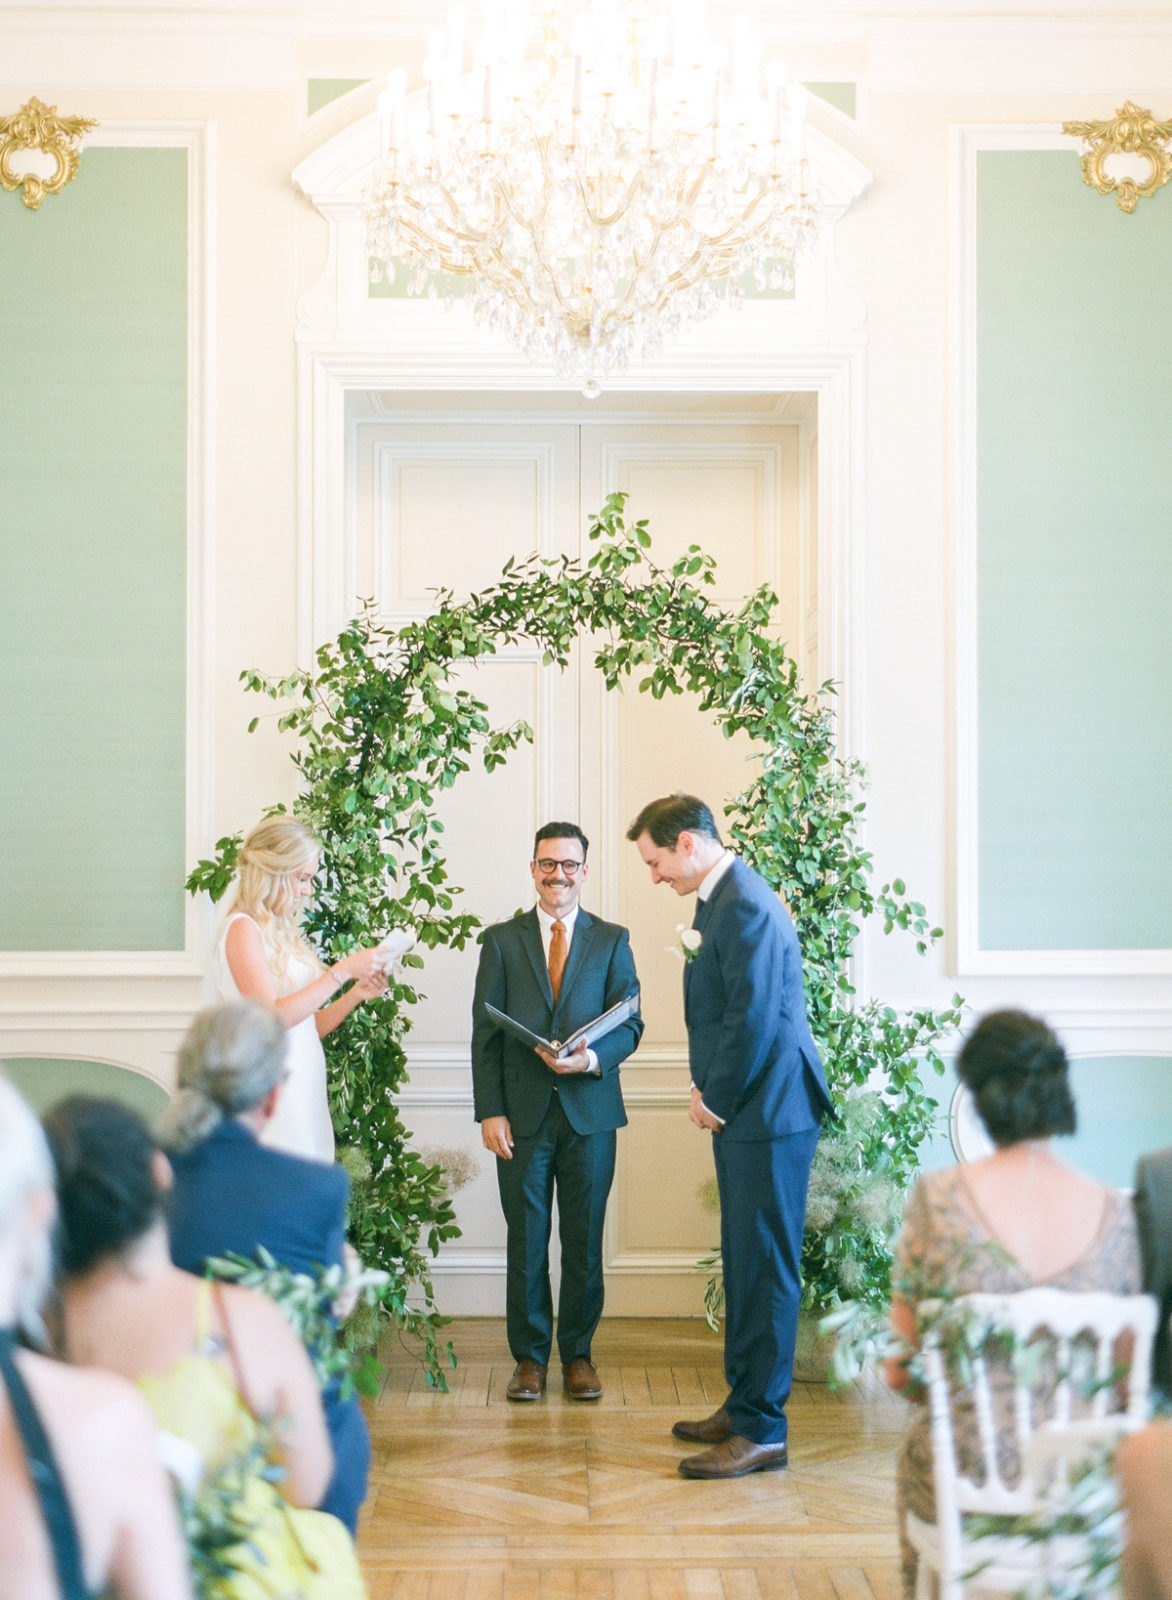 Chateau Bouffemont Wedding Photography | Paris, France Destination Wedding | Molly Carr Photography | Fine Art Film Photography | Jennifer Fox Weddings | Ceremony With Floral Arch by Floraison